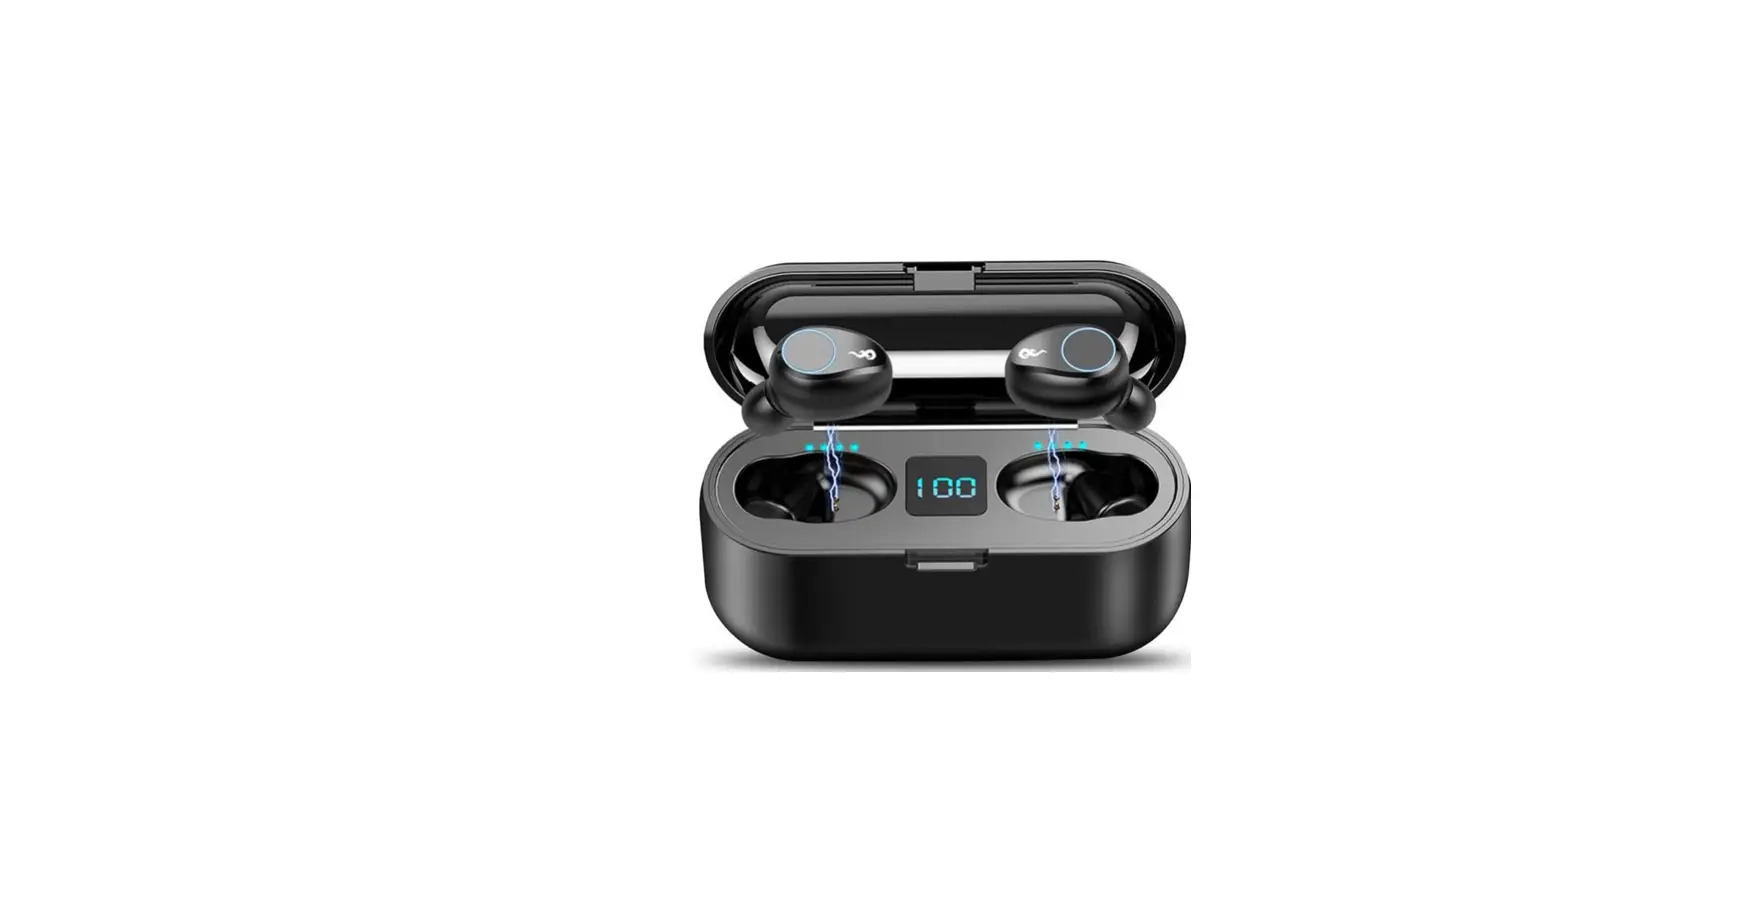 How To Pair Tws Wireless Earbuds | CellularNews